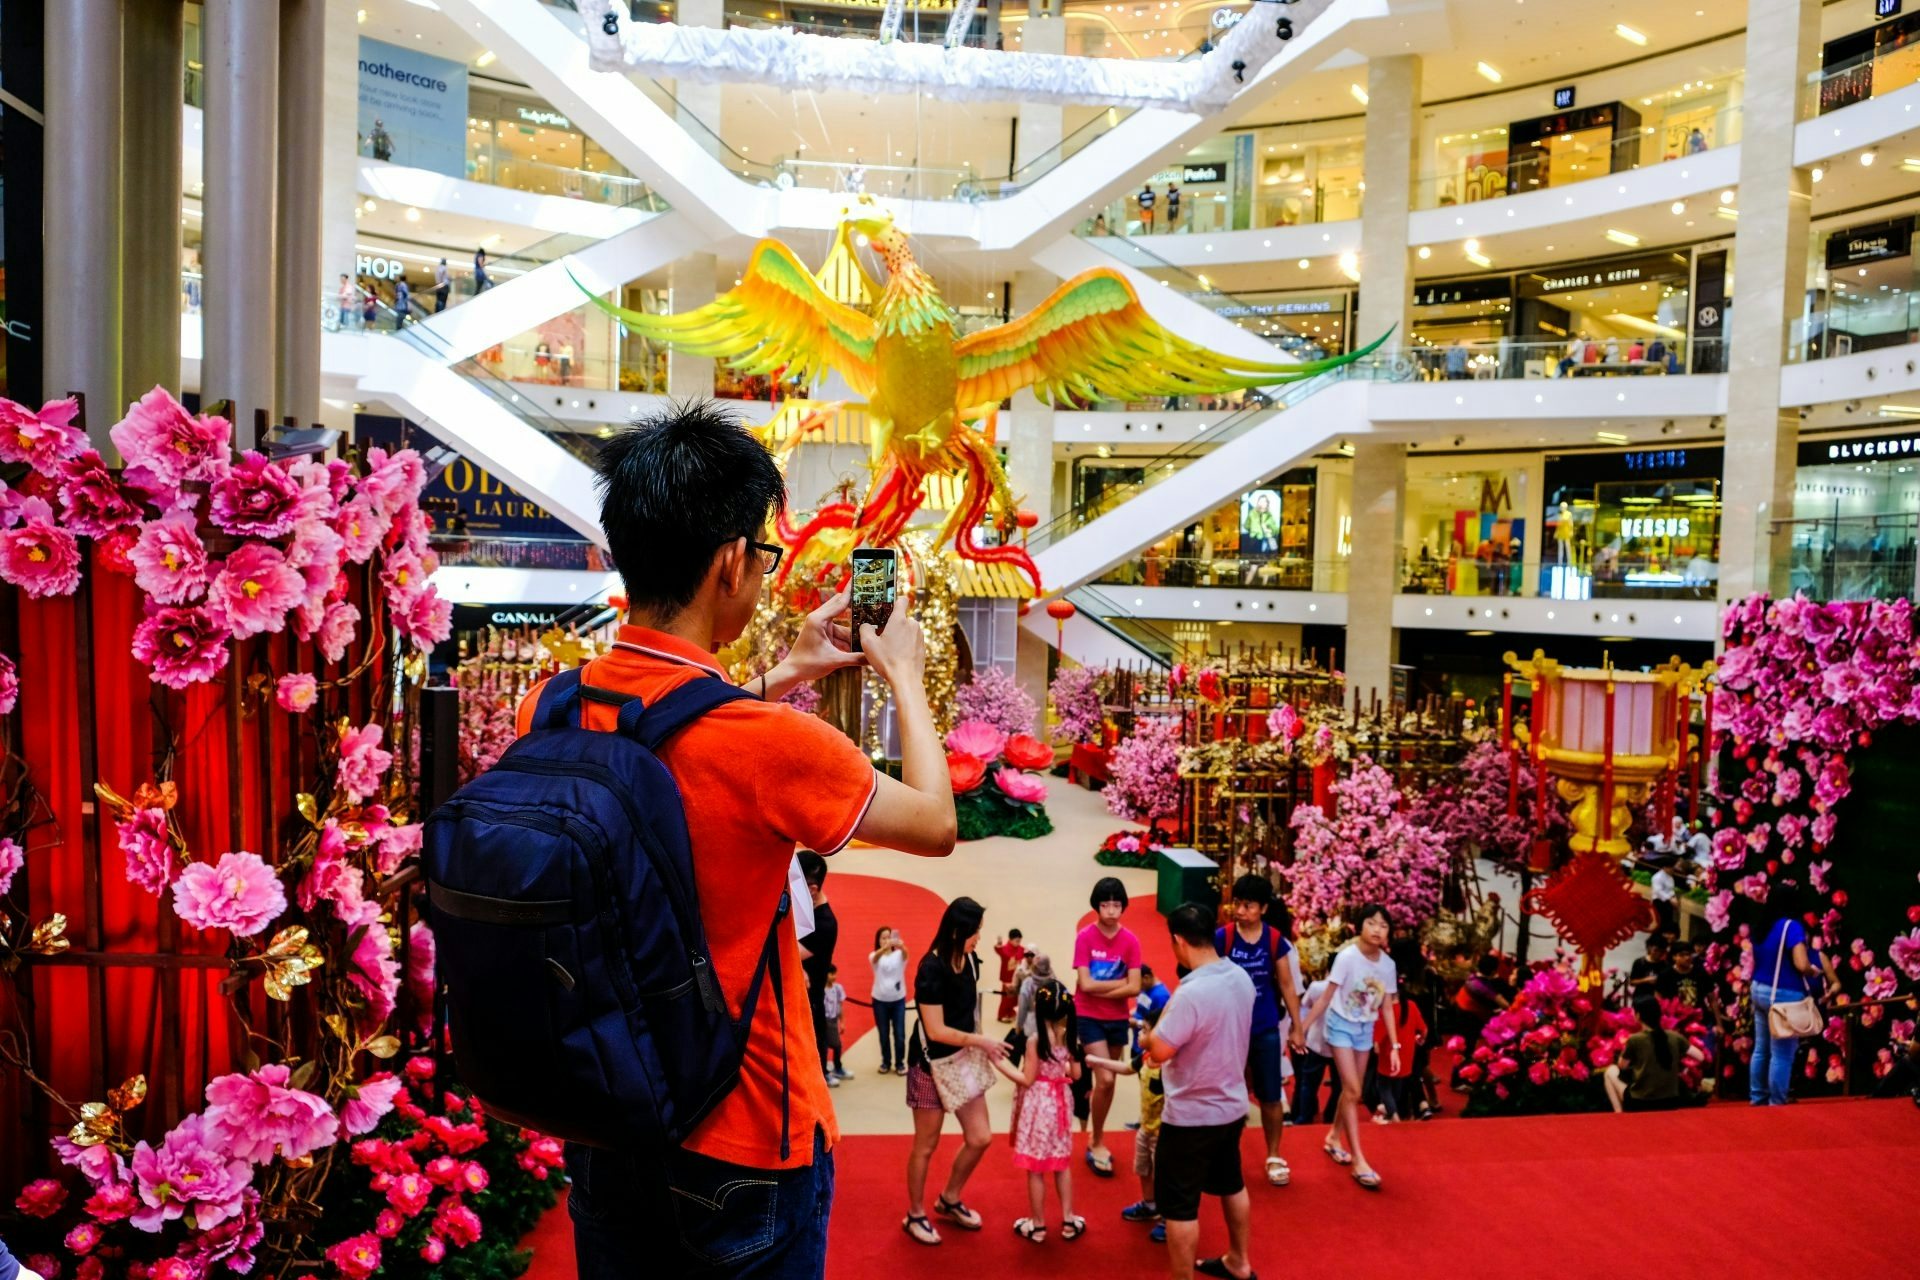 Malaysia aims to boost tourists' luxury shopping with a summer sales event. (Alang Zabidi/Shutterstock.com)